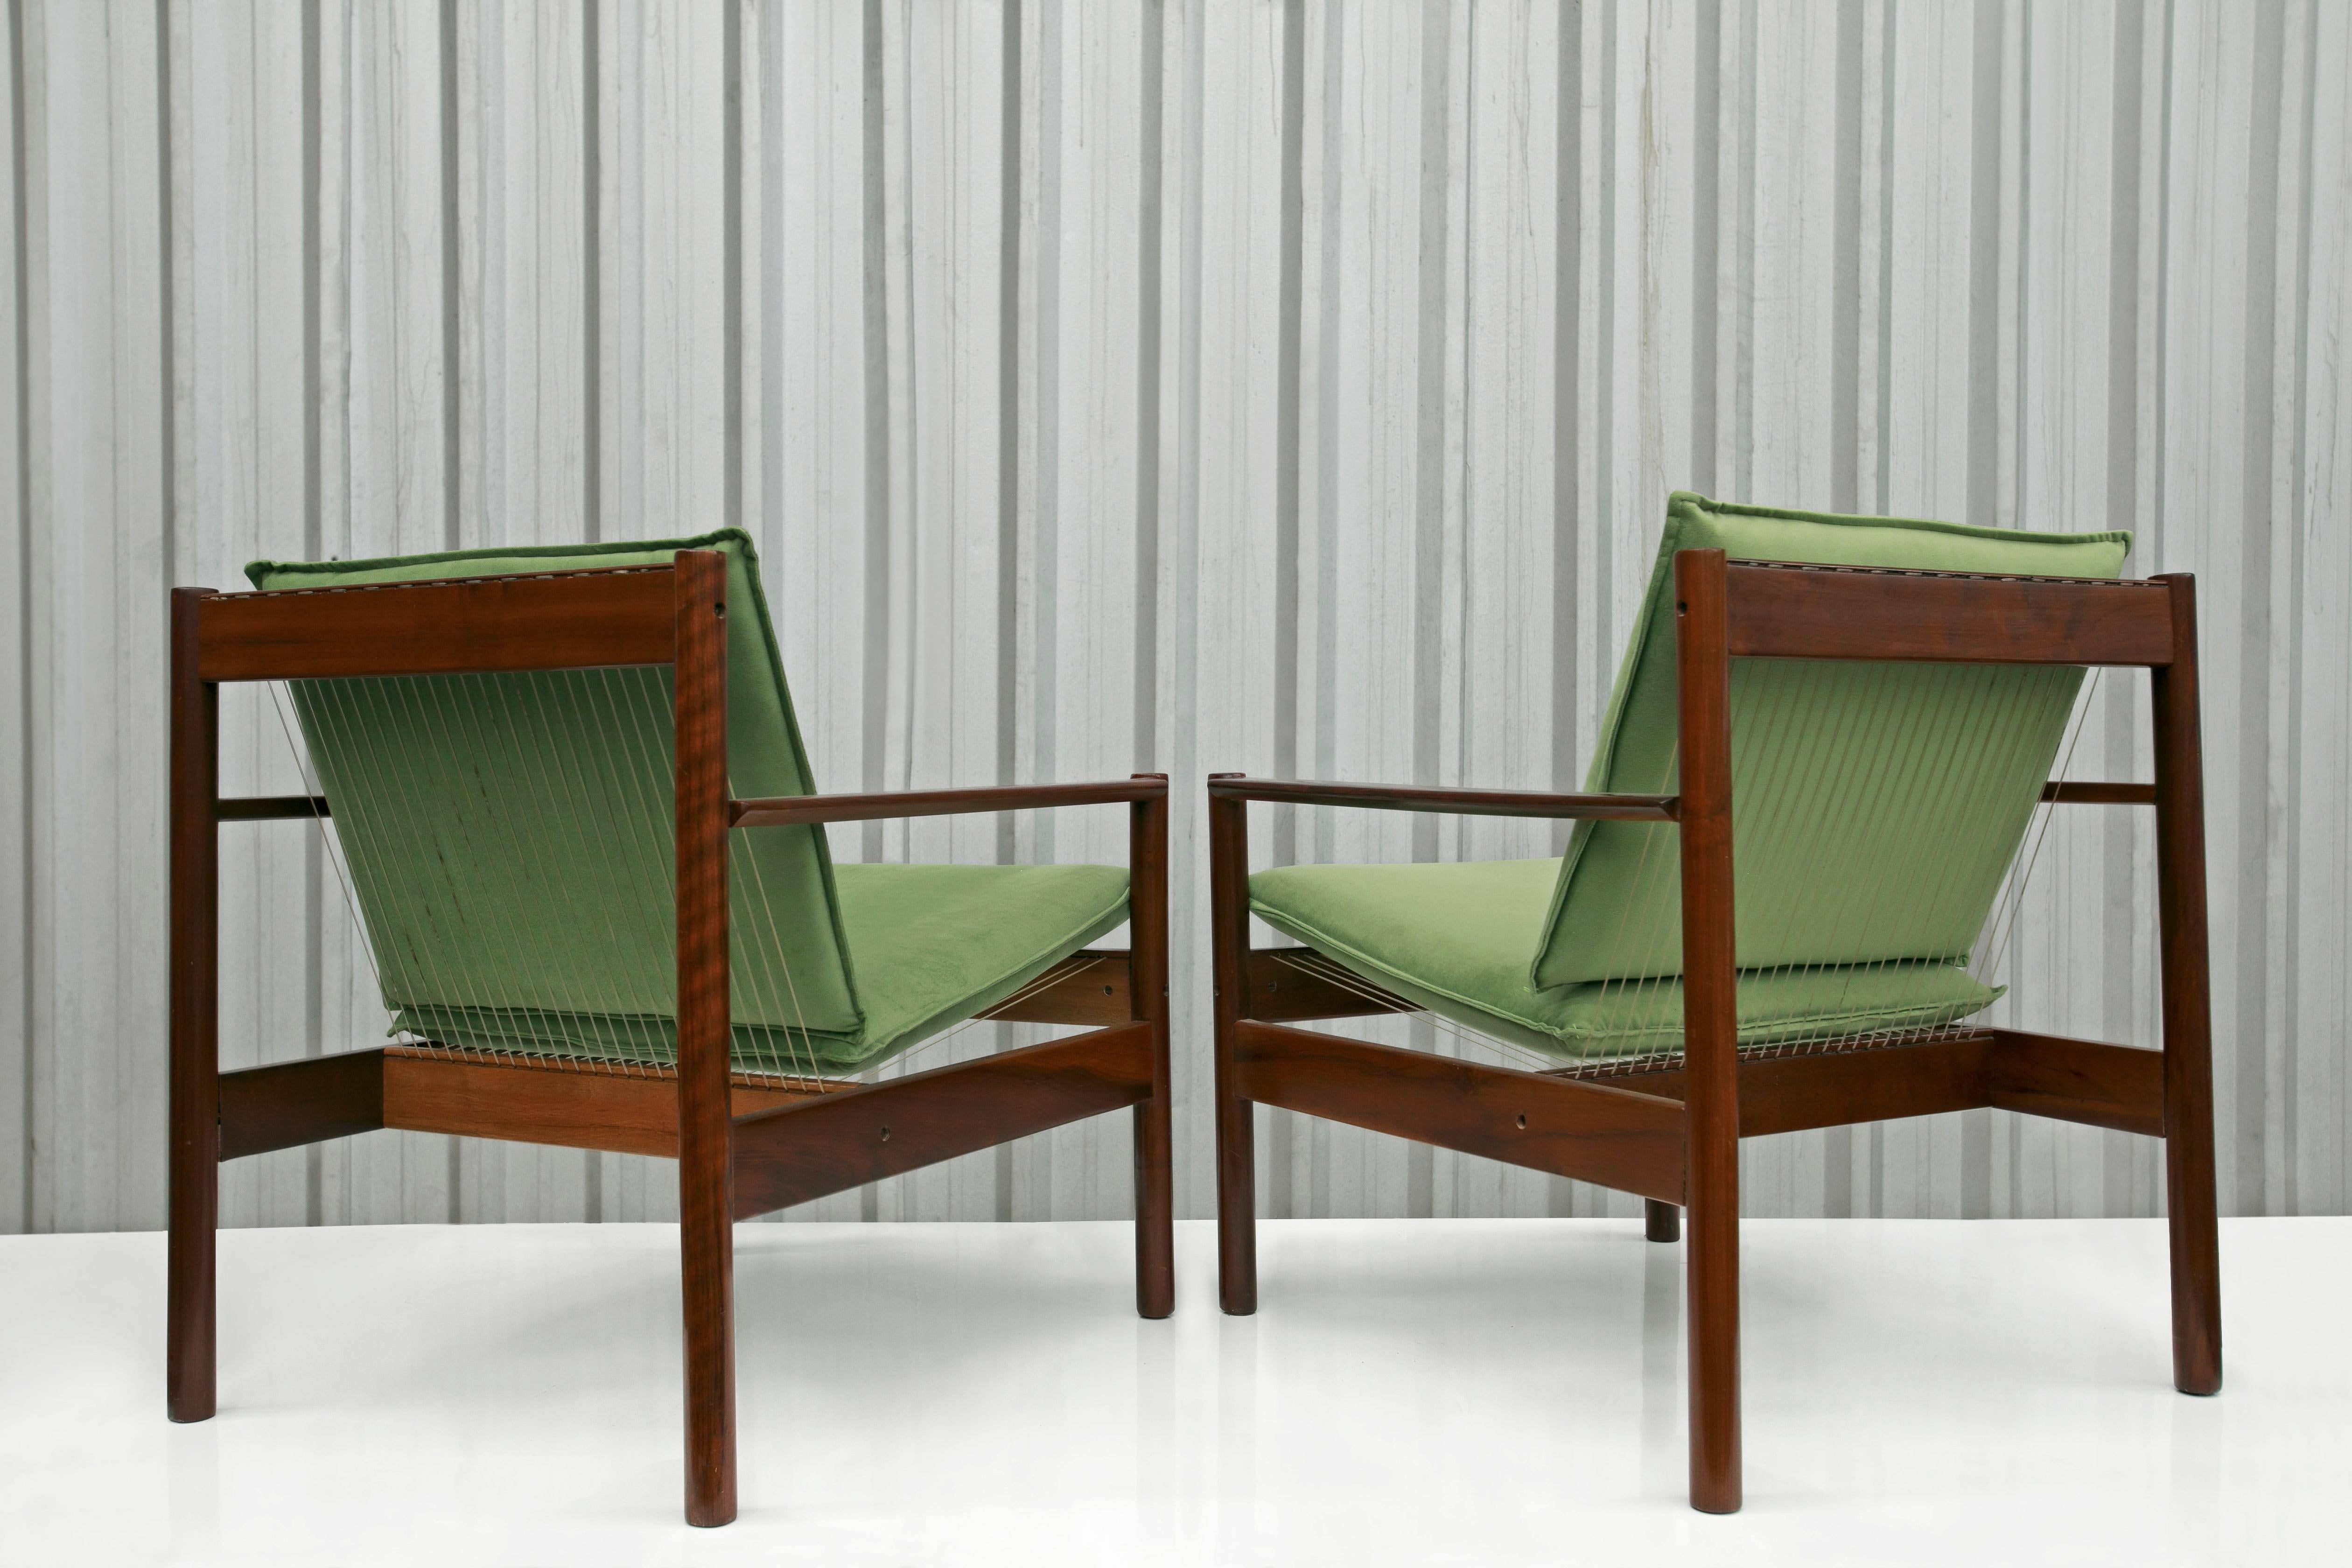 20th Century Brazilian Modern Armchairs in Hardwood & Fabric, Michel Arnoult, 1960s For Sale